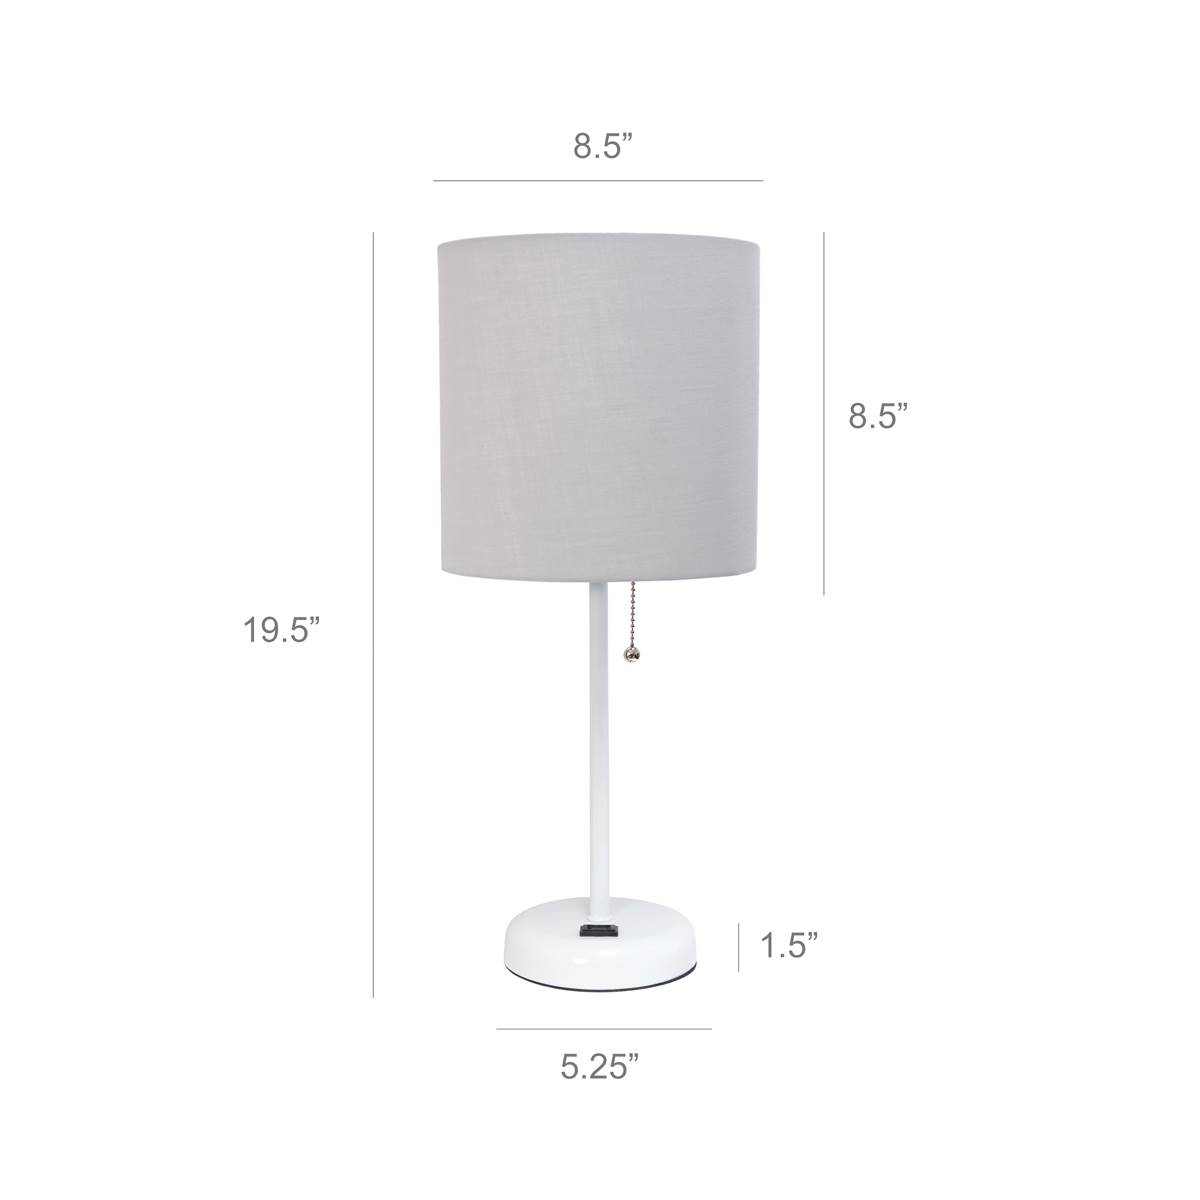 LimeLights White Stick Lamp W/Charging Outlet/Grey Shade-Set Of 2